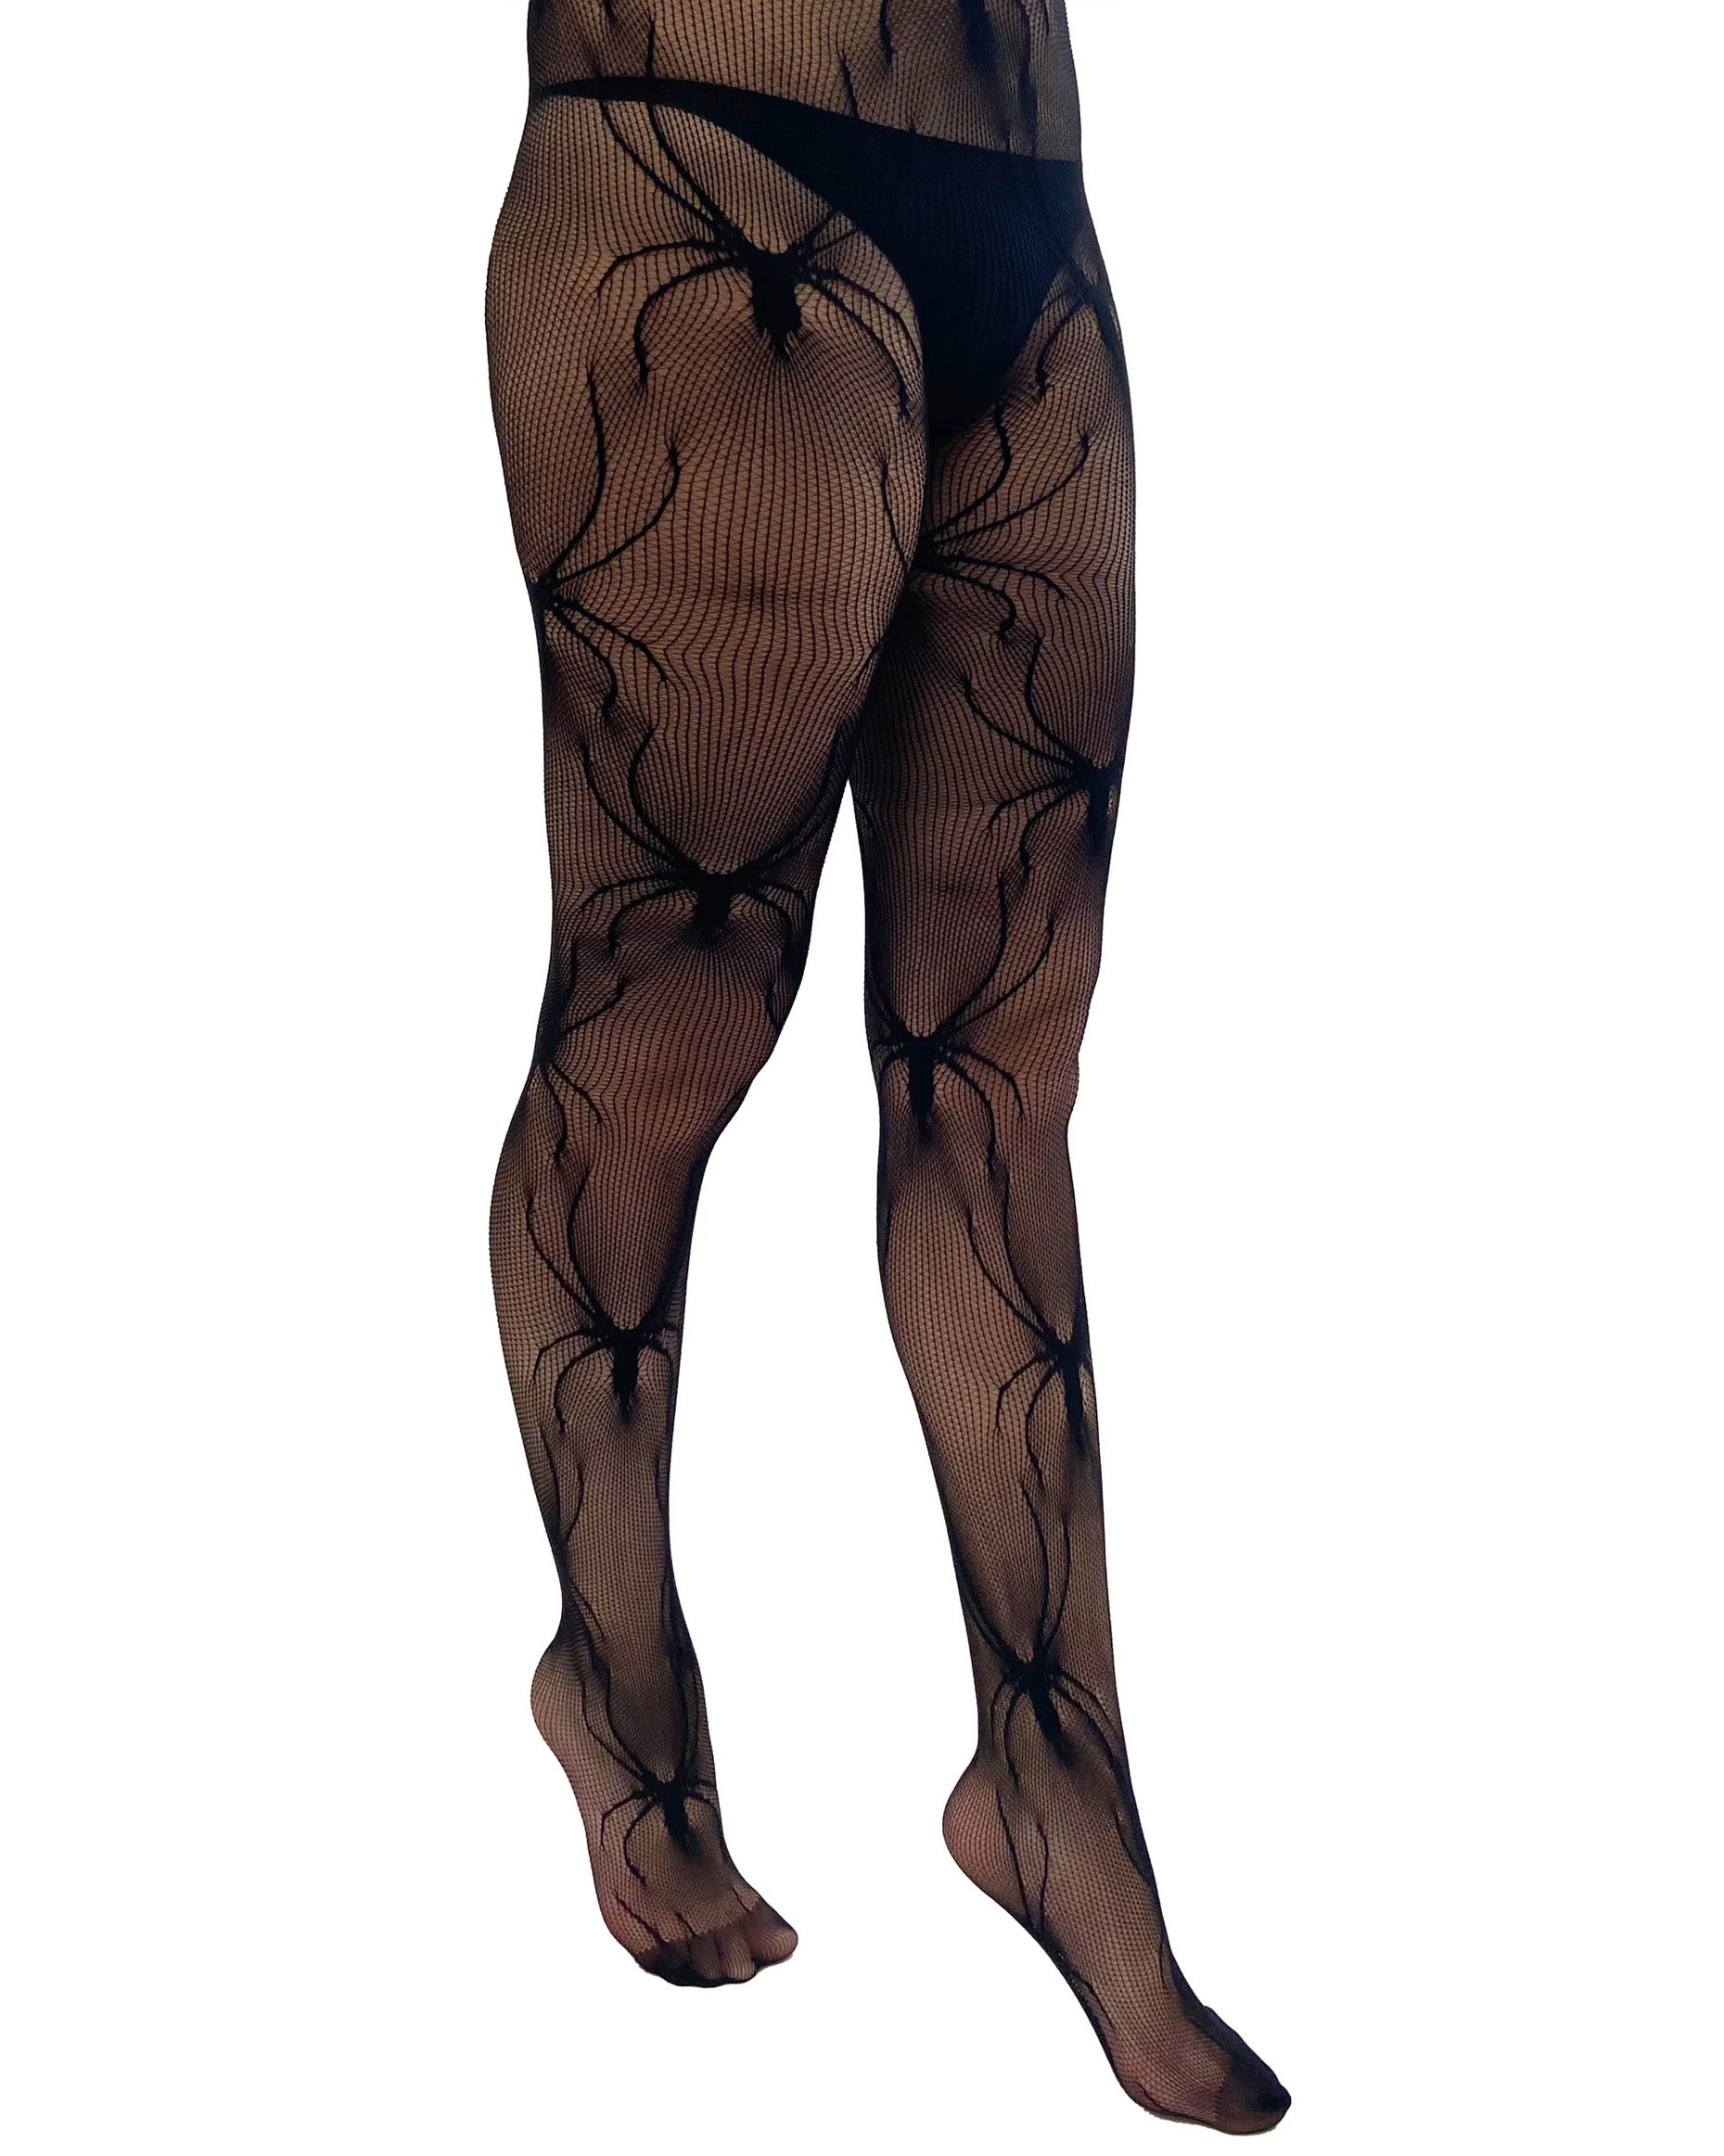 Pamela Mann Spider Net Tights - Black openwork fishnet tights with an all over spider design, perfect for Halloween.